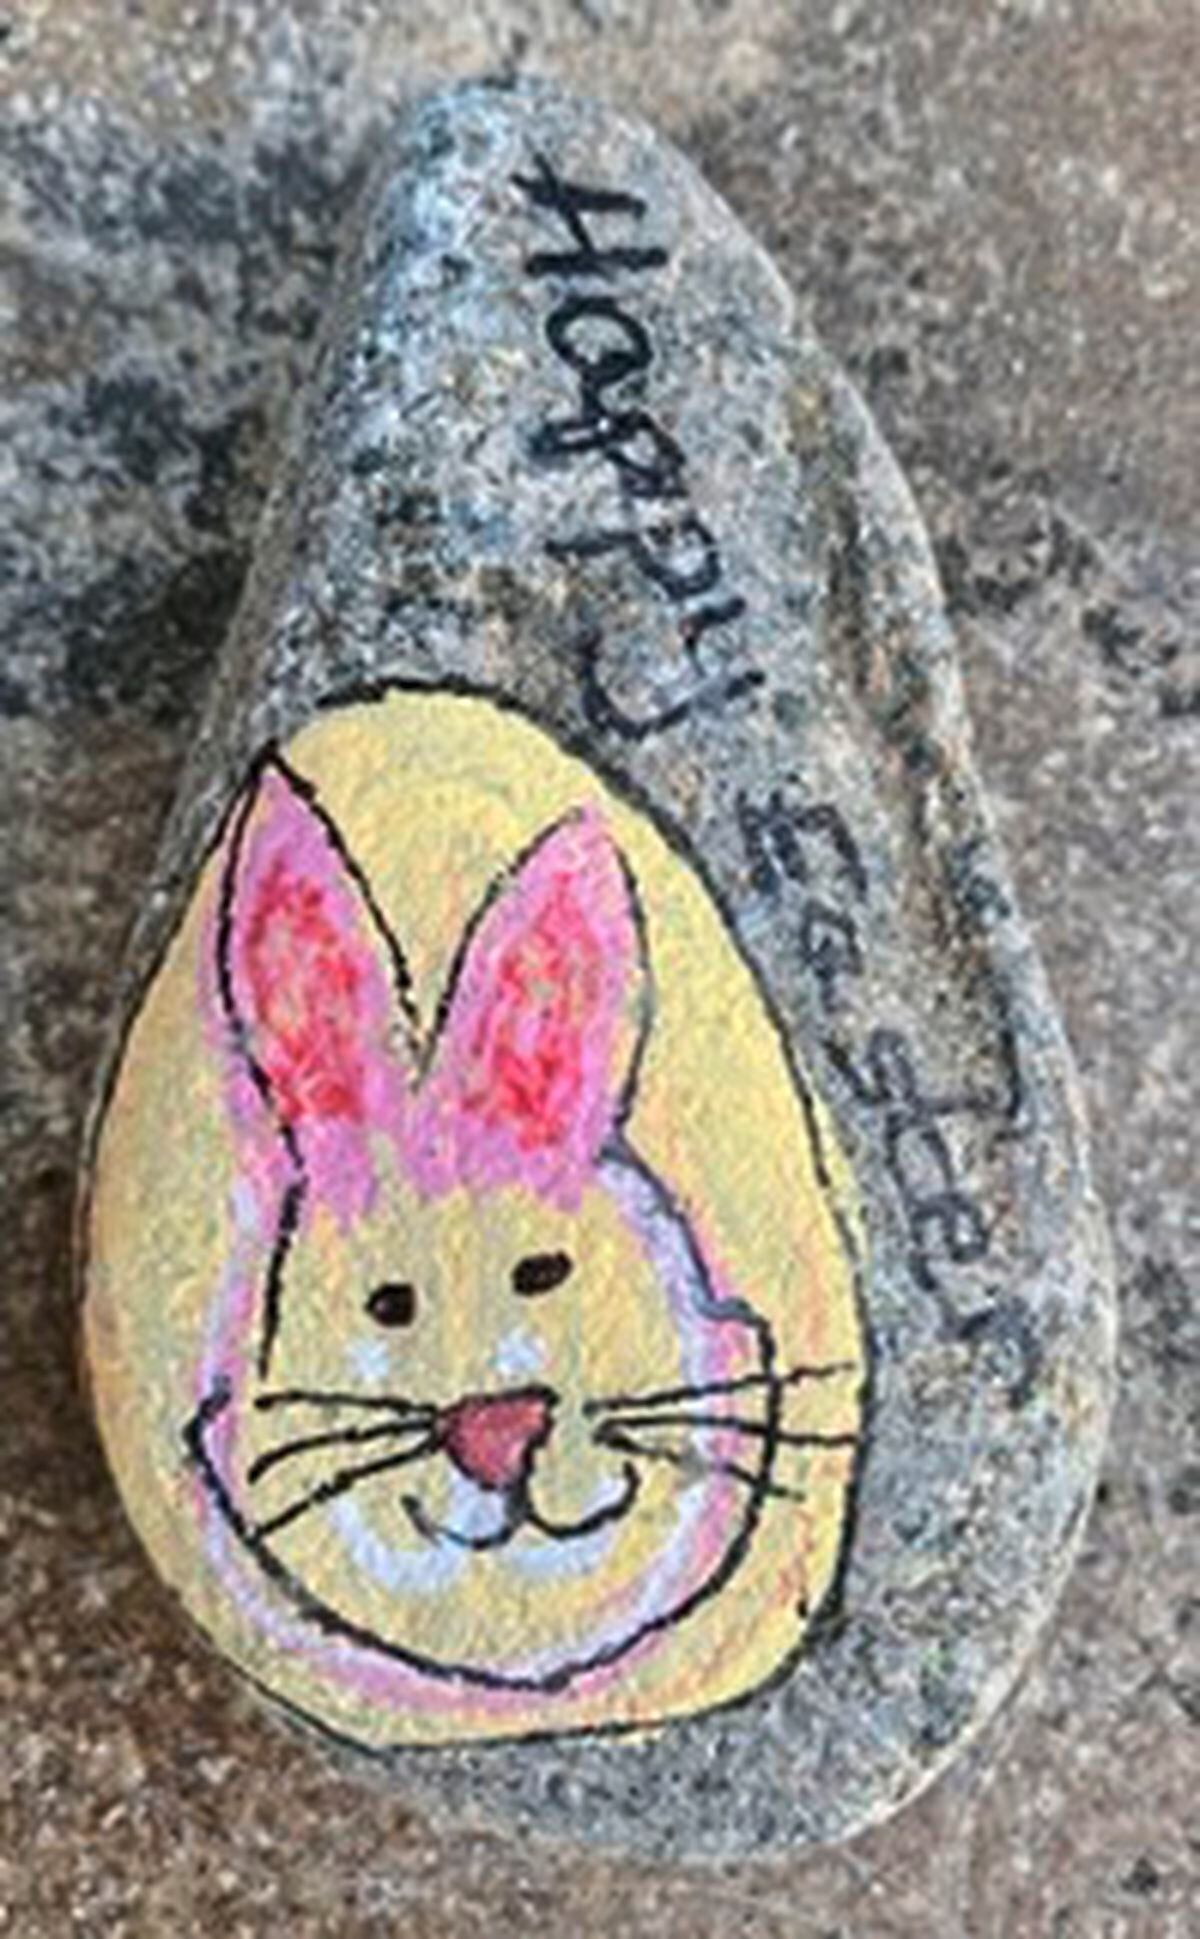 Painted pebbles from the Town Church community art gallery. Image supplied by Ruth Abernethy. (28254818)